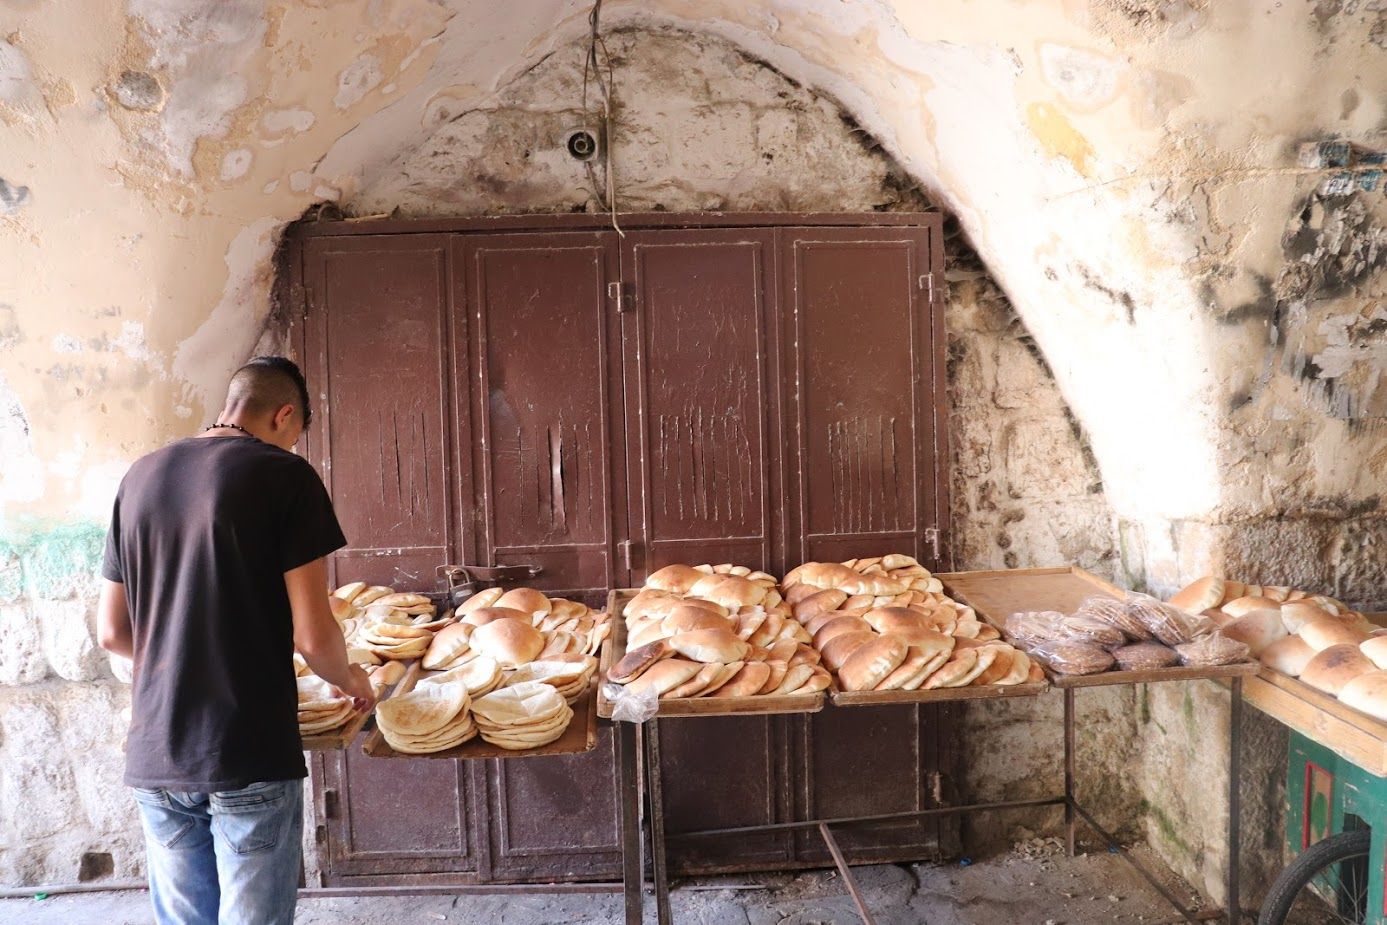 Bakeries stack carts high with freshly baked bread, steering them throughout the market to sell to shoppers. Image by Carly Graf. Palestine, 2019.